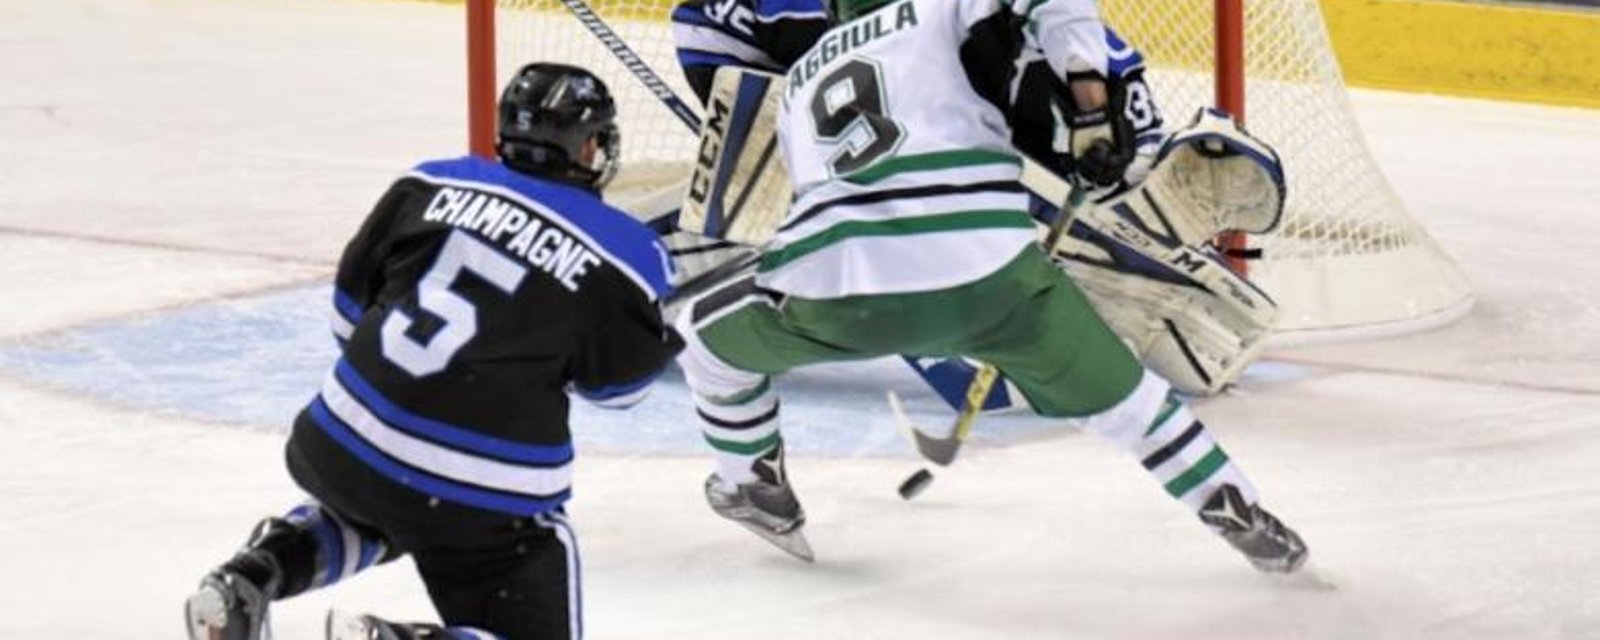 Must See: North Dakota player with goal of the year in the NCAA!